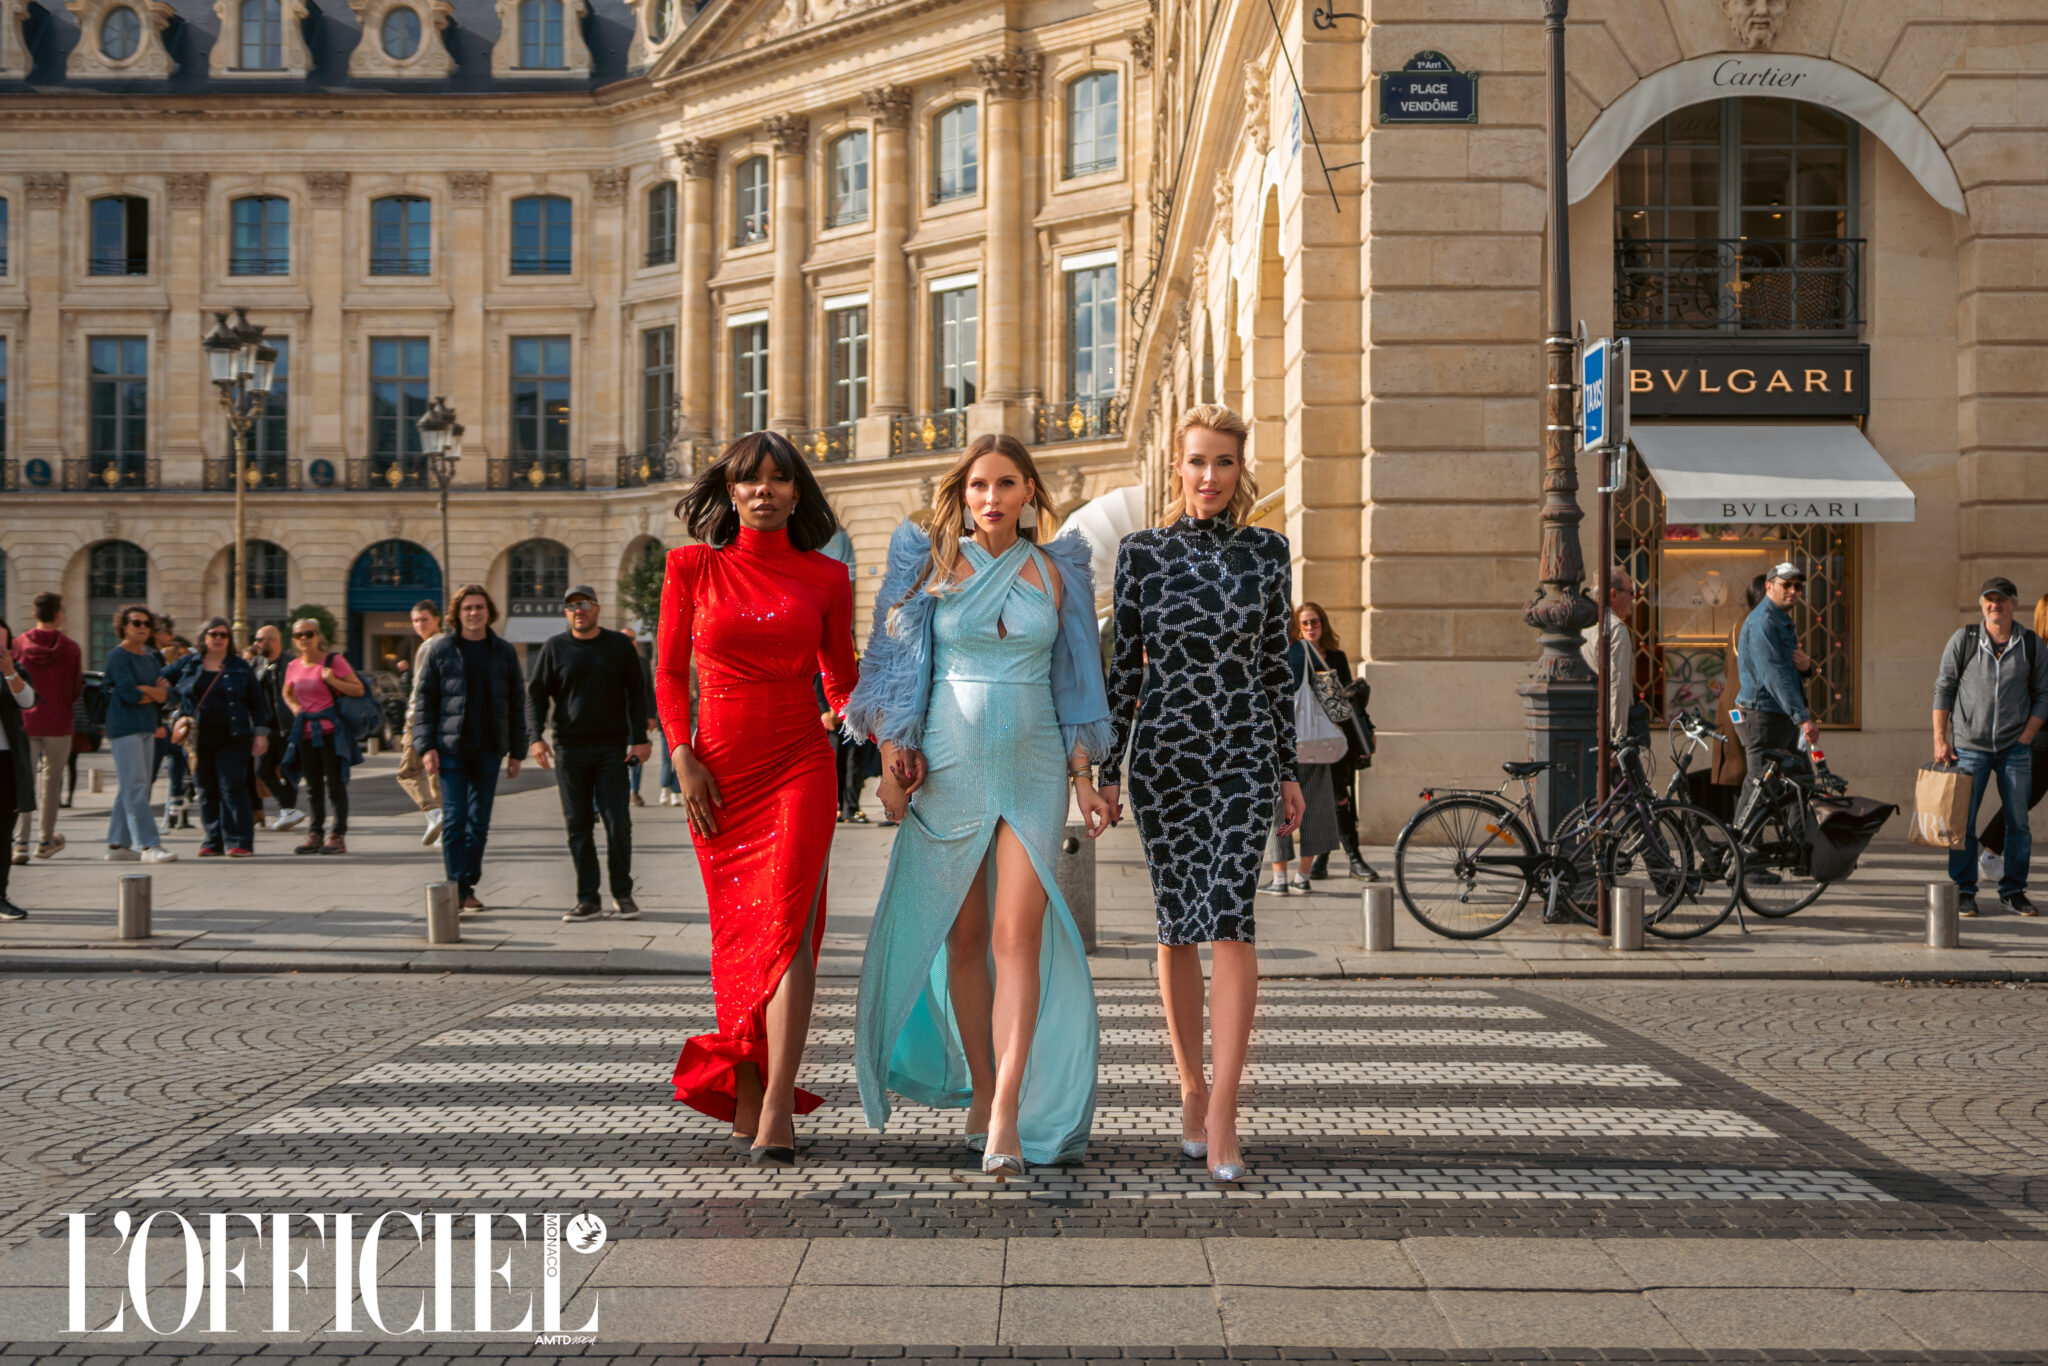 Feature at L'Officiel Monaco during Paris Fashion Week SS 23. Visual Fashion Story from the magical Paris. Featuring: Nicolas Besson, Gemy Maalouf, Charriol, Sol Angelann and more. 78